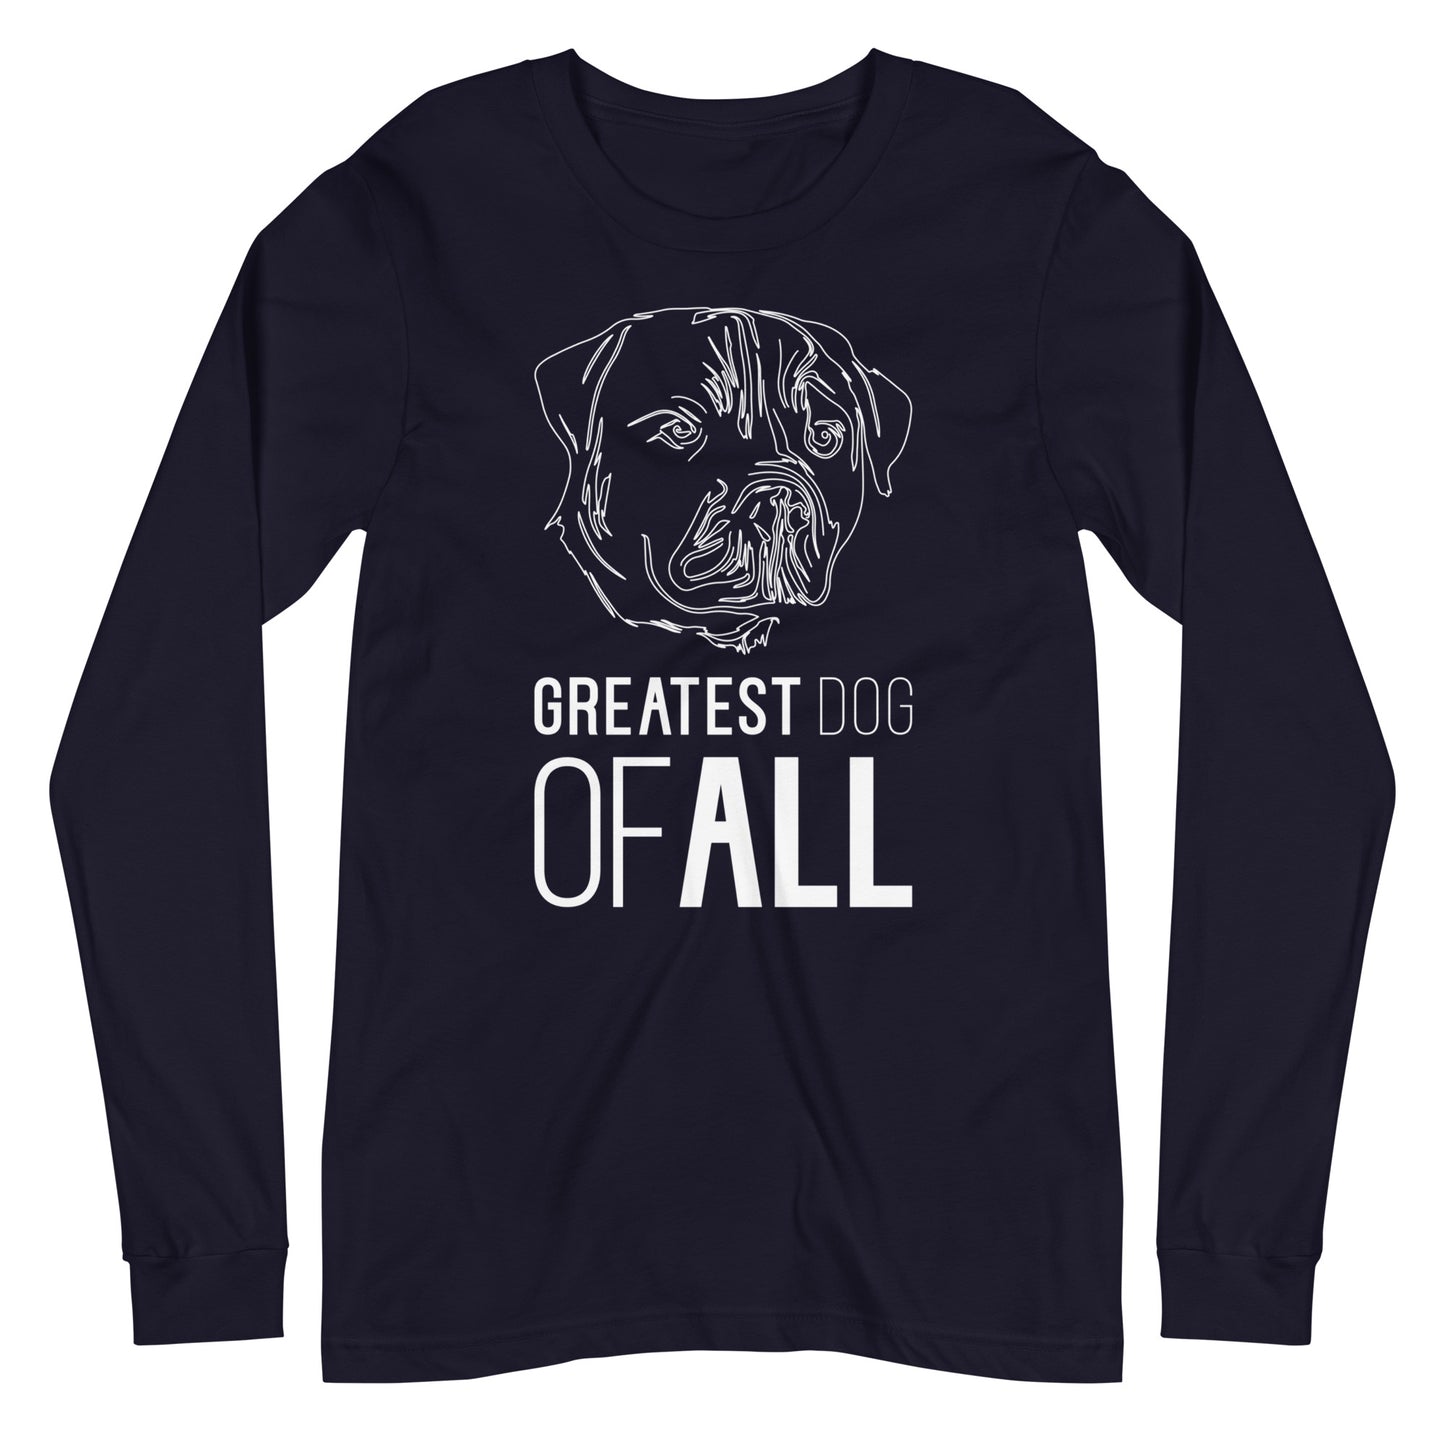 White line Rottweiler face with Greatest Dog of All caption on unisex navy long sleeve t-shirt